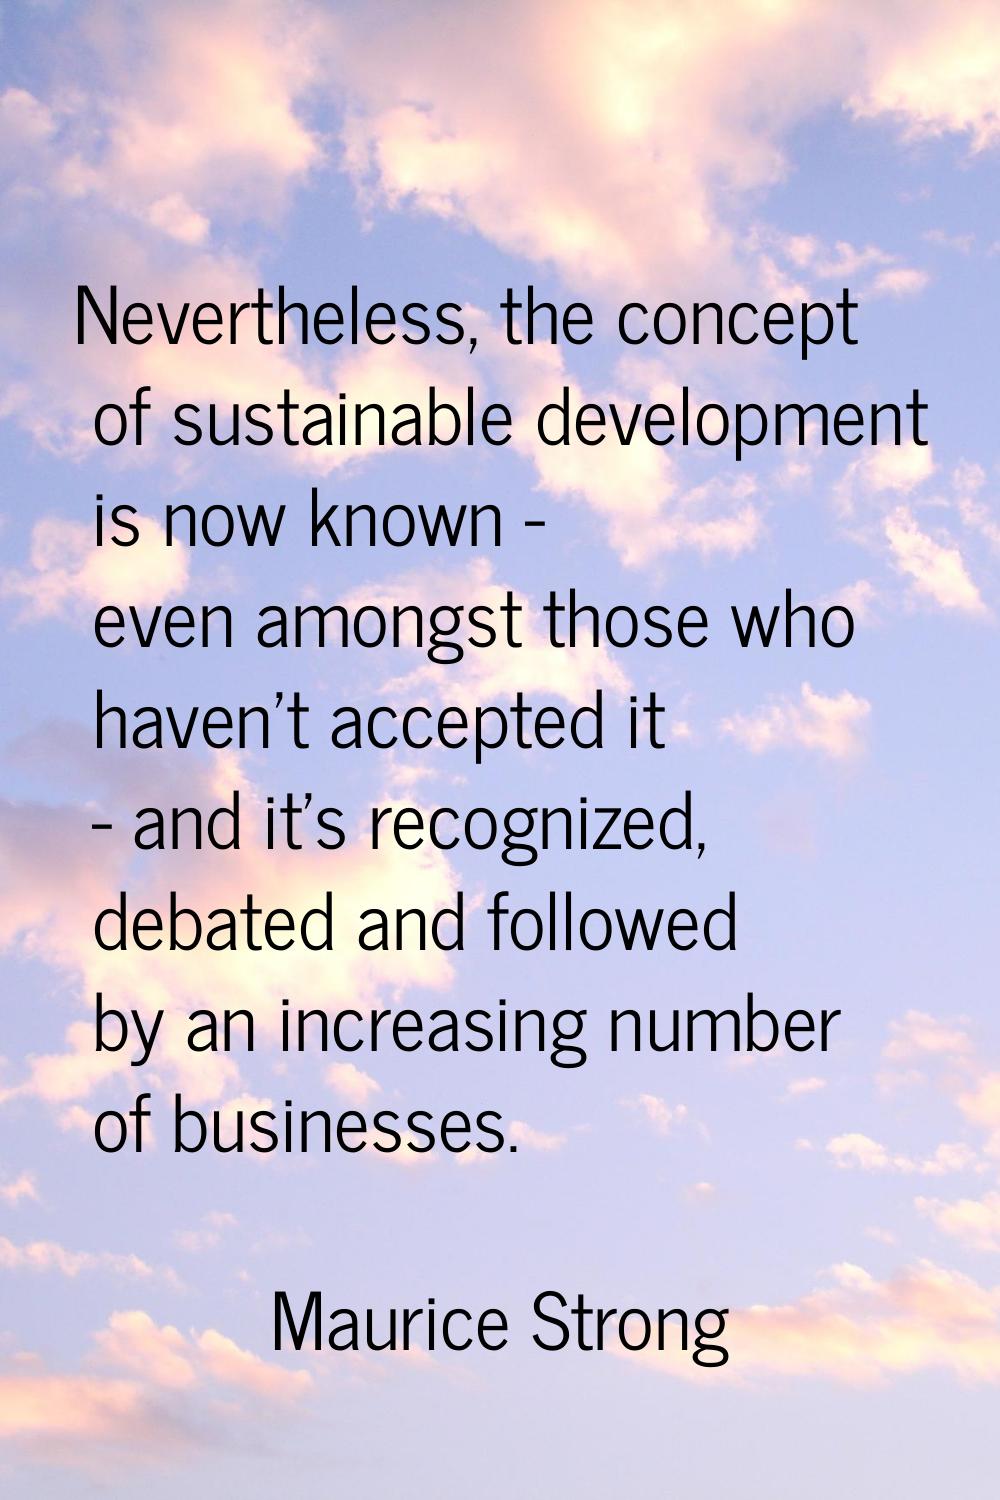 Nevertheless, the concept of sustainable development is now known - even amongst those who haven't 